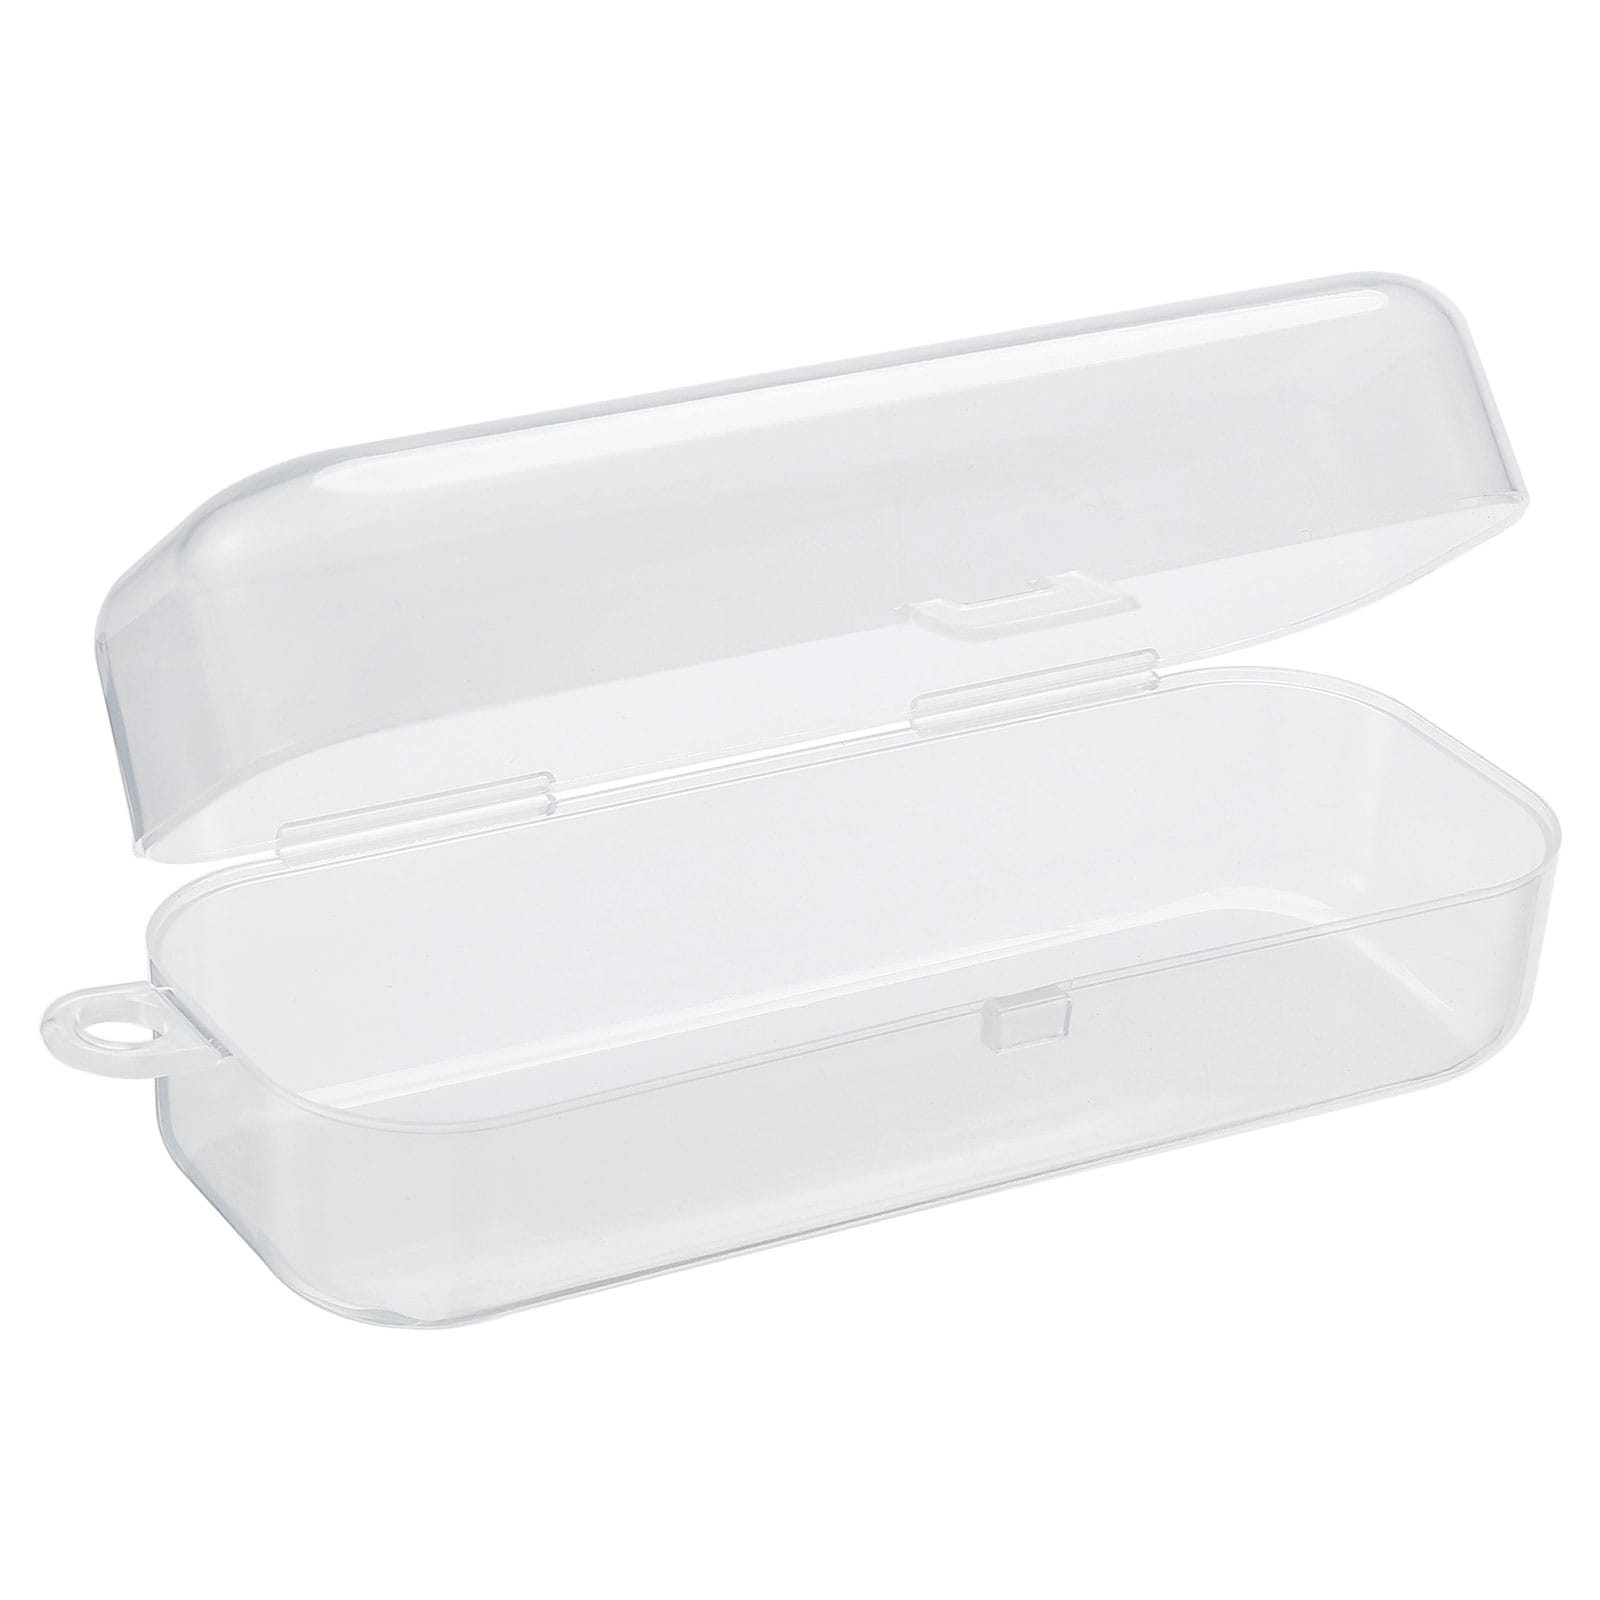 https://ak1.ostkcdn.com/images/products/is/images/direct/07cc59bc525504de336e6ed4891cde9e24f91958/Storage-Containers-with-Hinged-Lid-Plastic-Rectangle-Box-for-Art-Craft.jpg